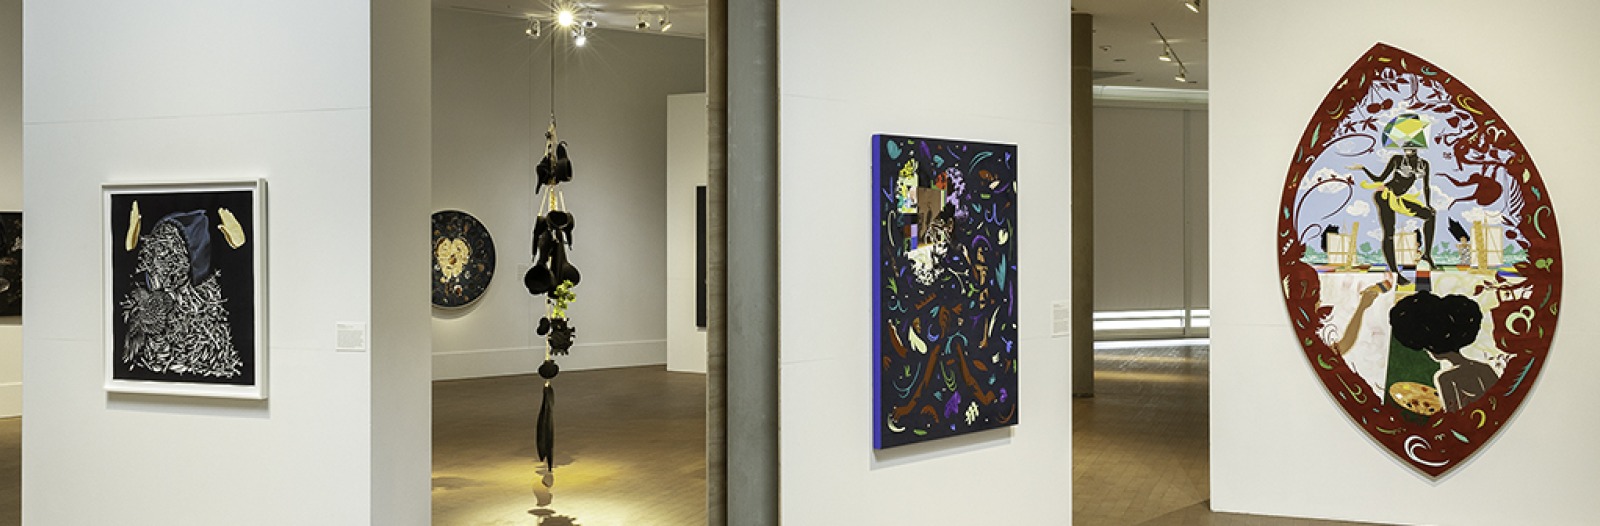 Installation view of works by William Villalongo